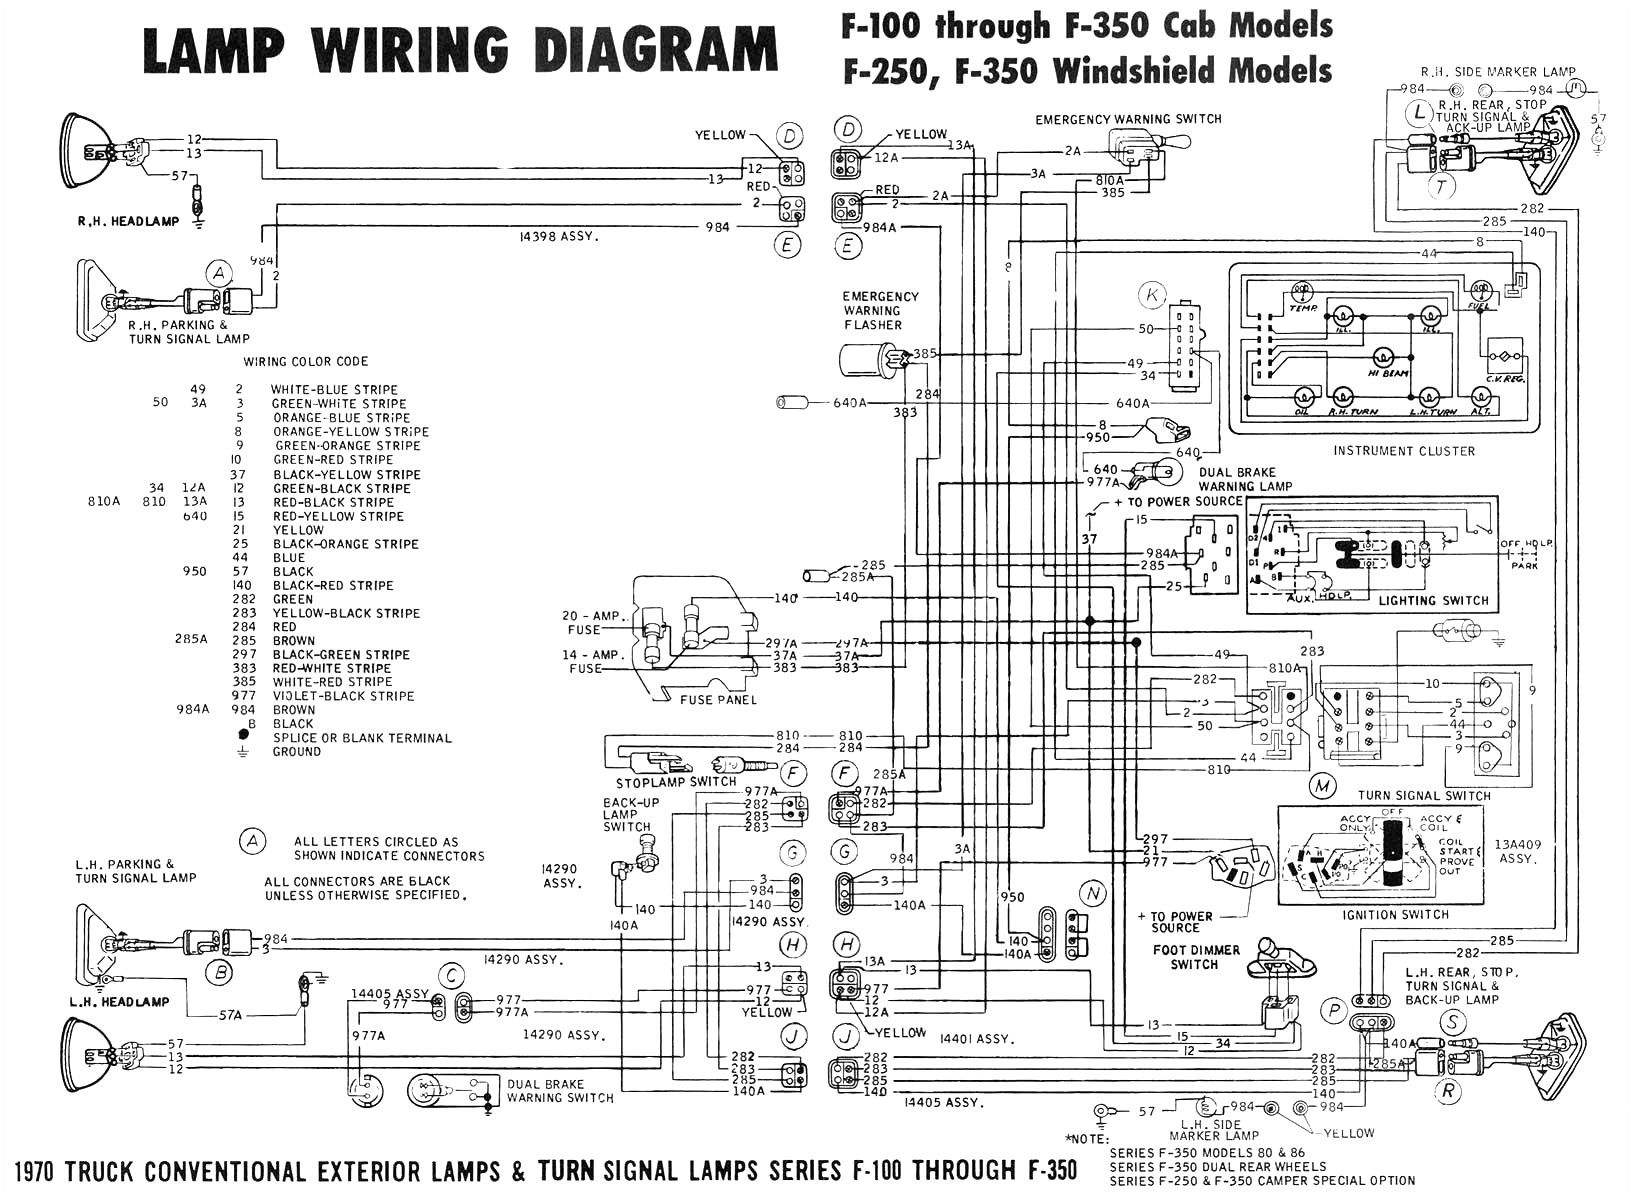 1935 ford headlight wiring electrical schematic wiring diagram 1935 ford headlight switch wiring